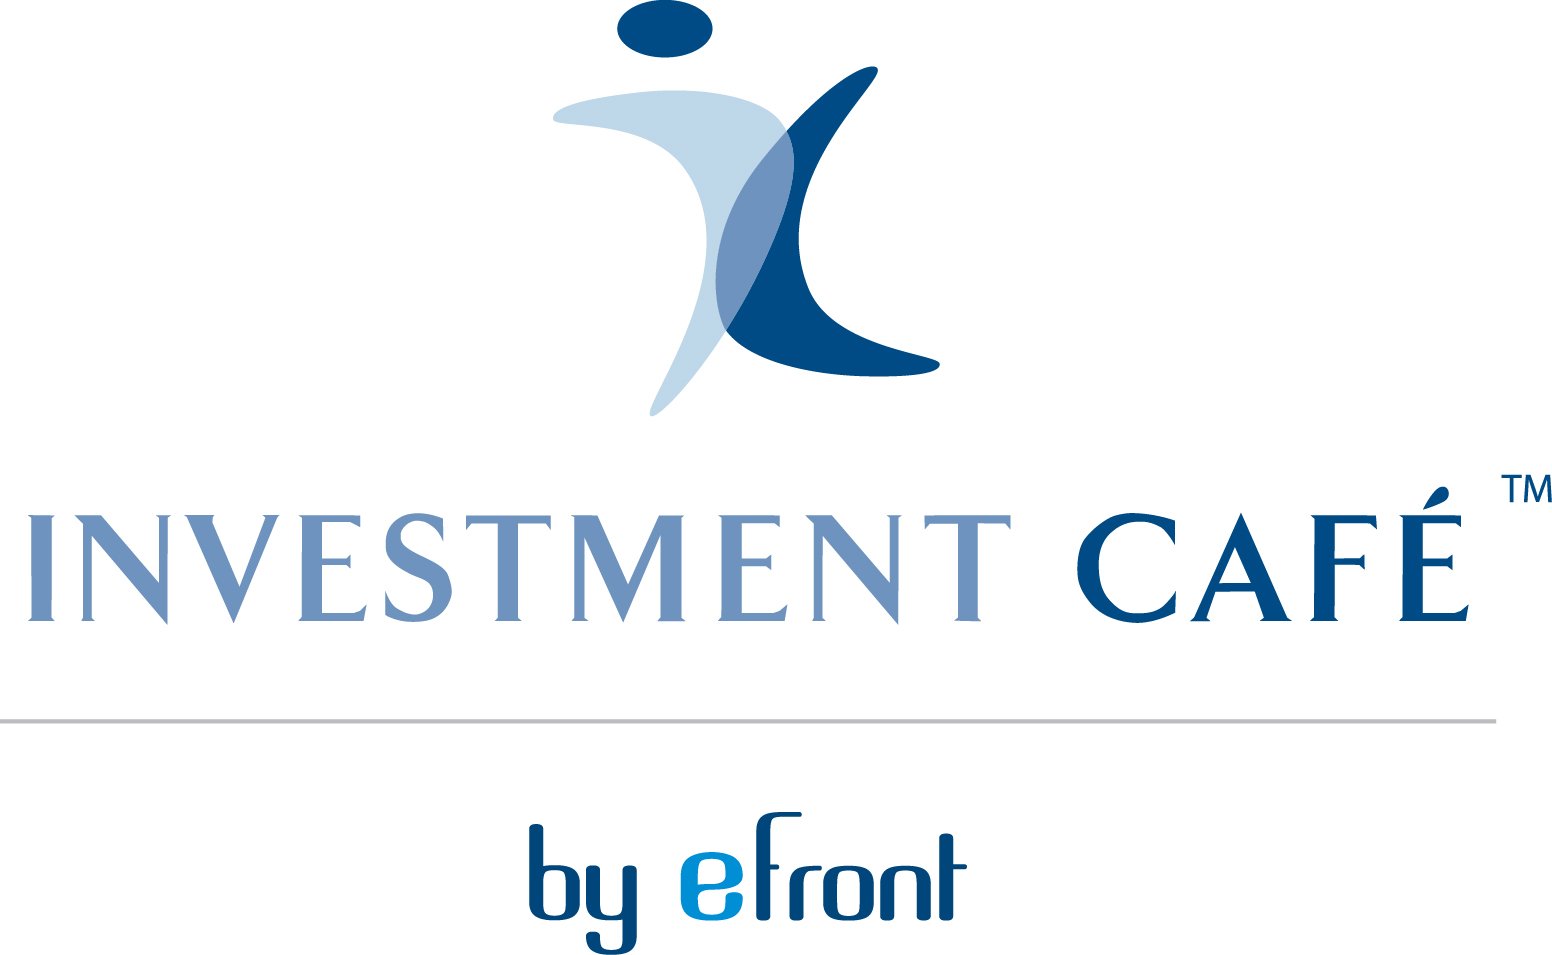 Investment Cafe